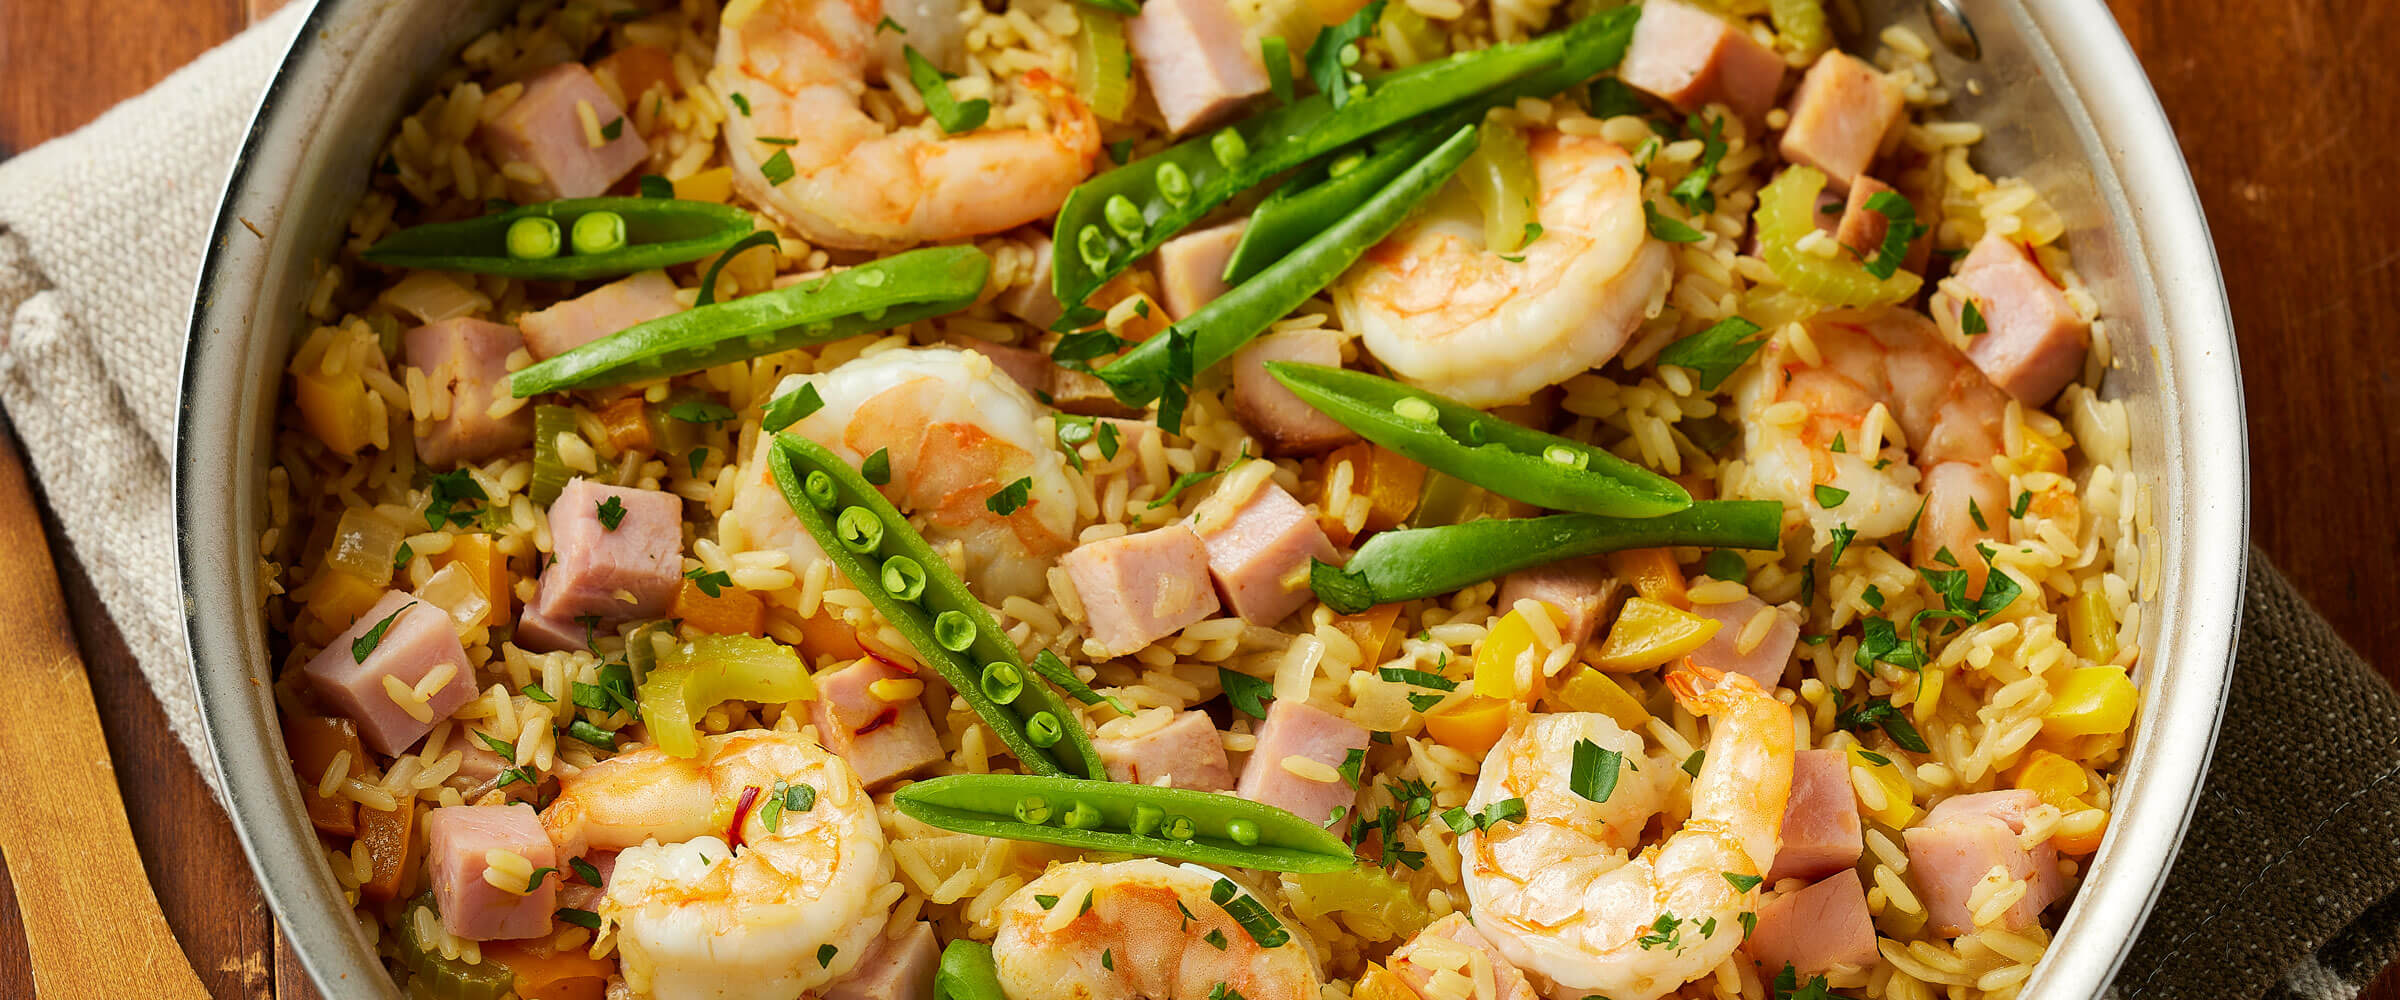 Paella-Style Rice with Ham and Shrimp in bowl